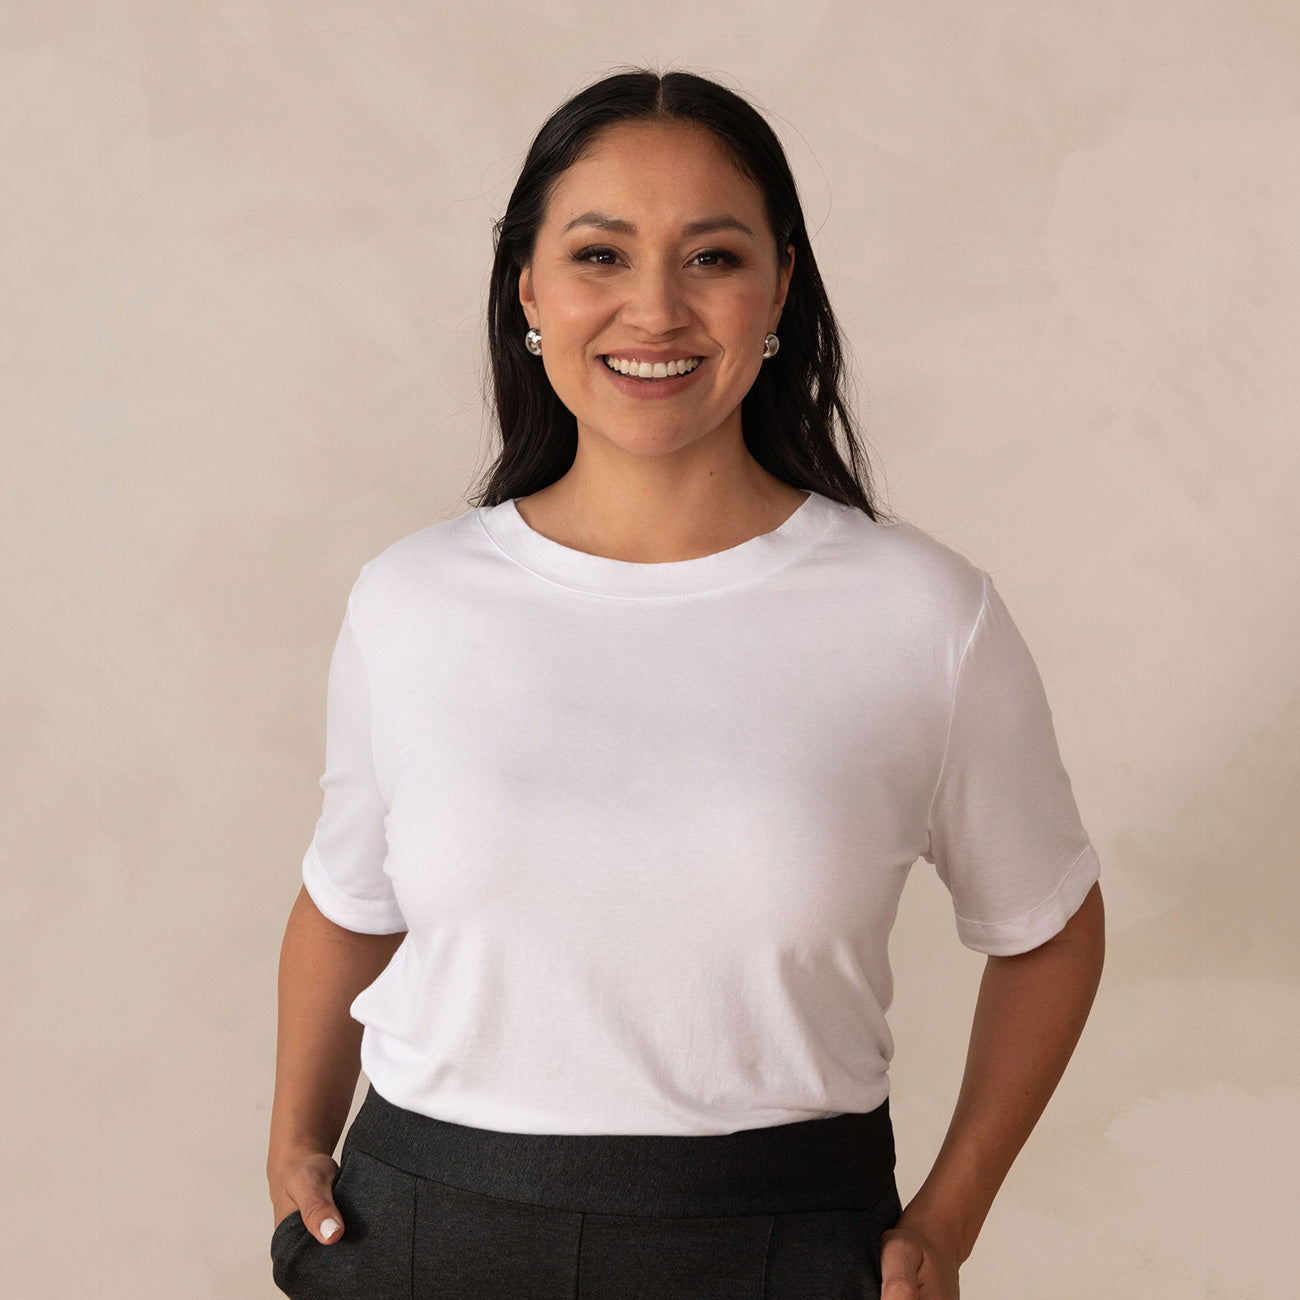 woman wearing a white scoop neck t-shirt